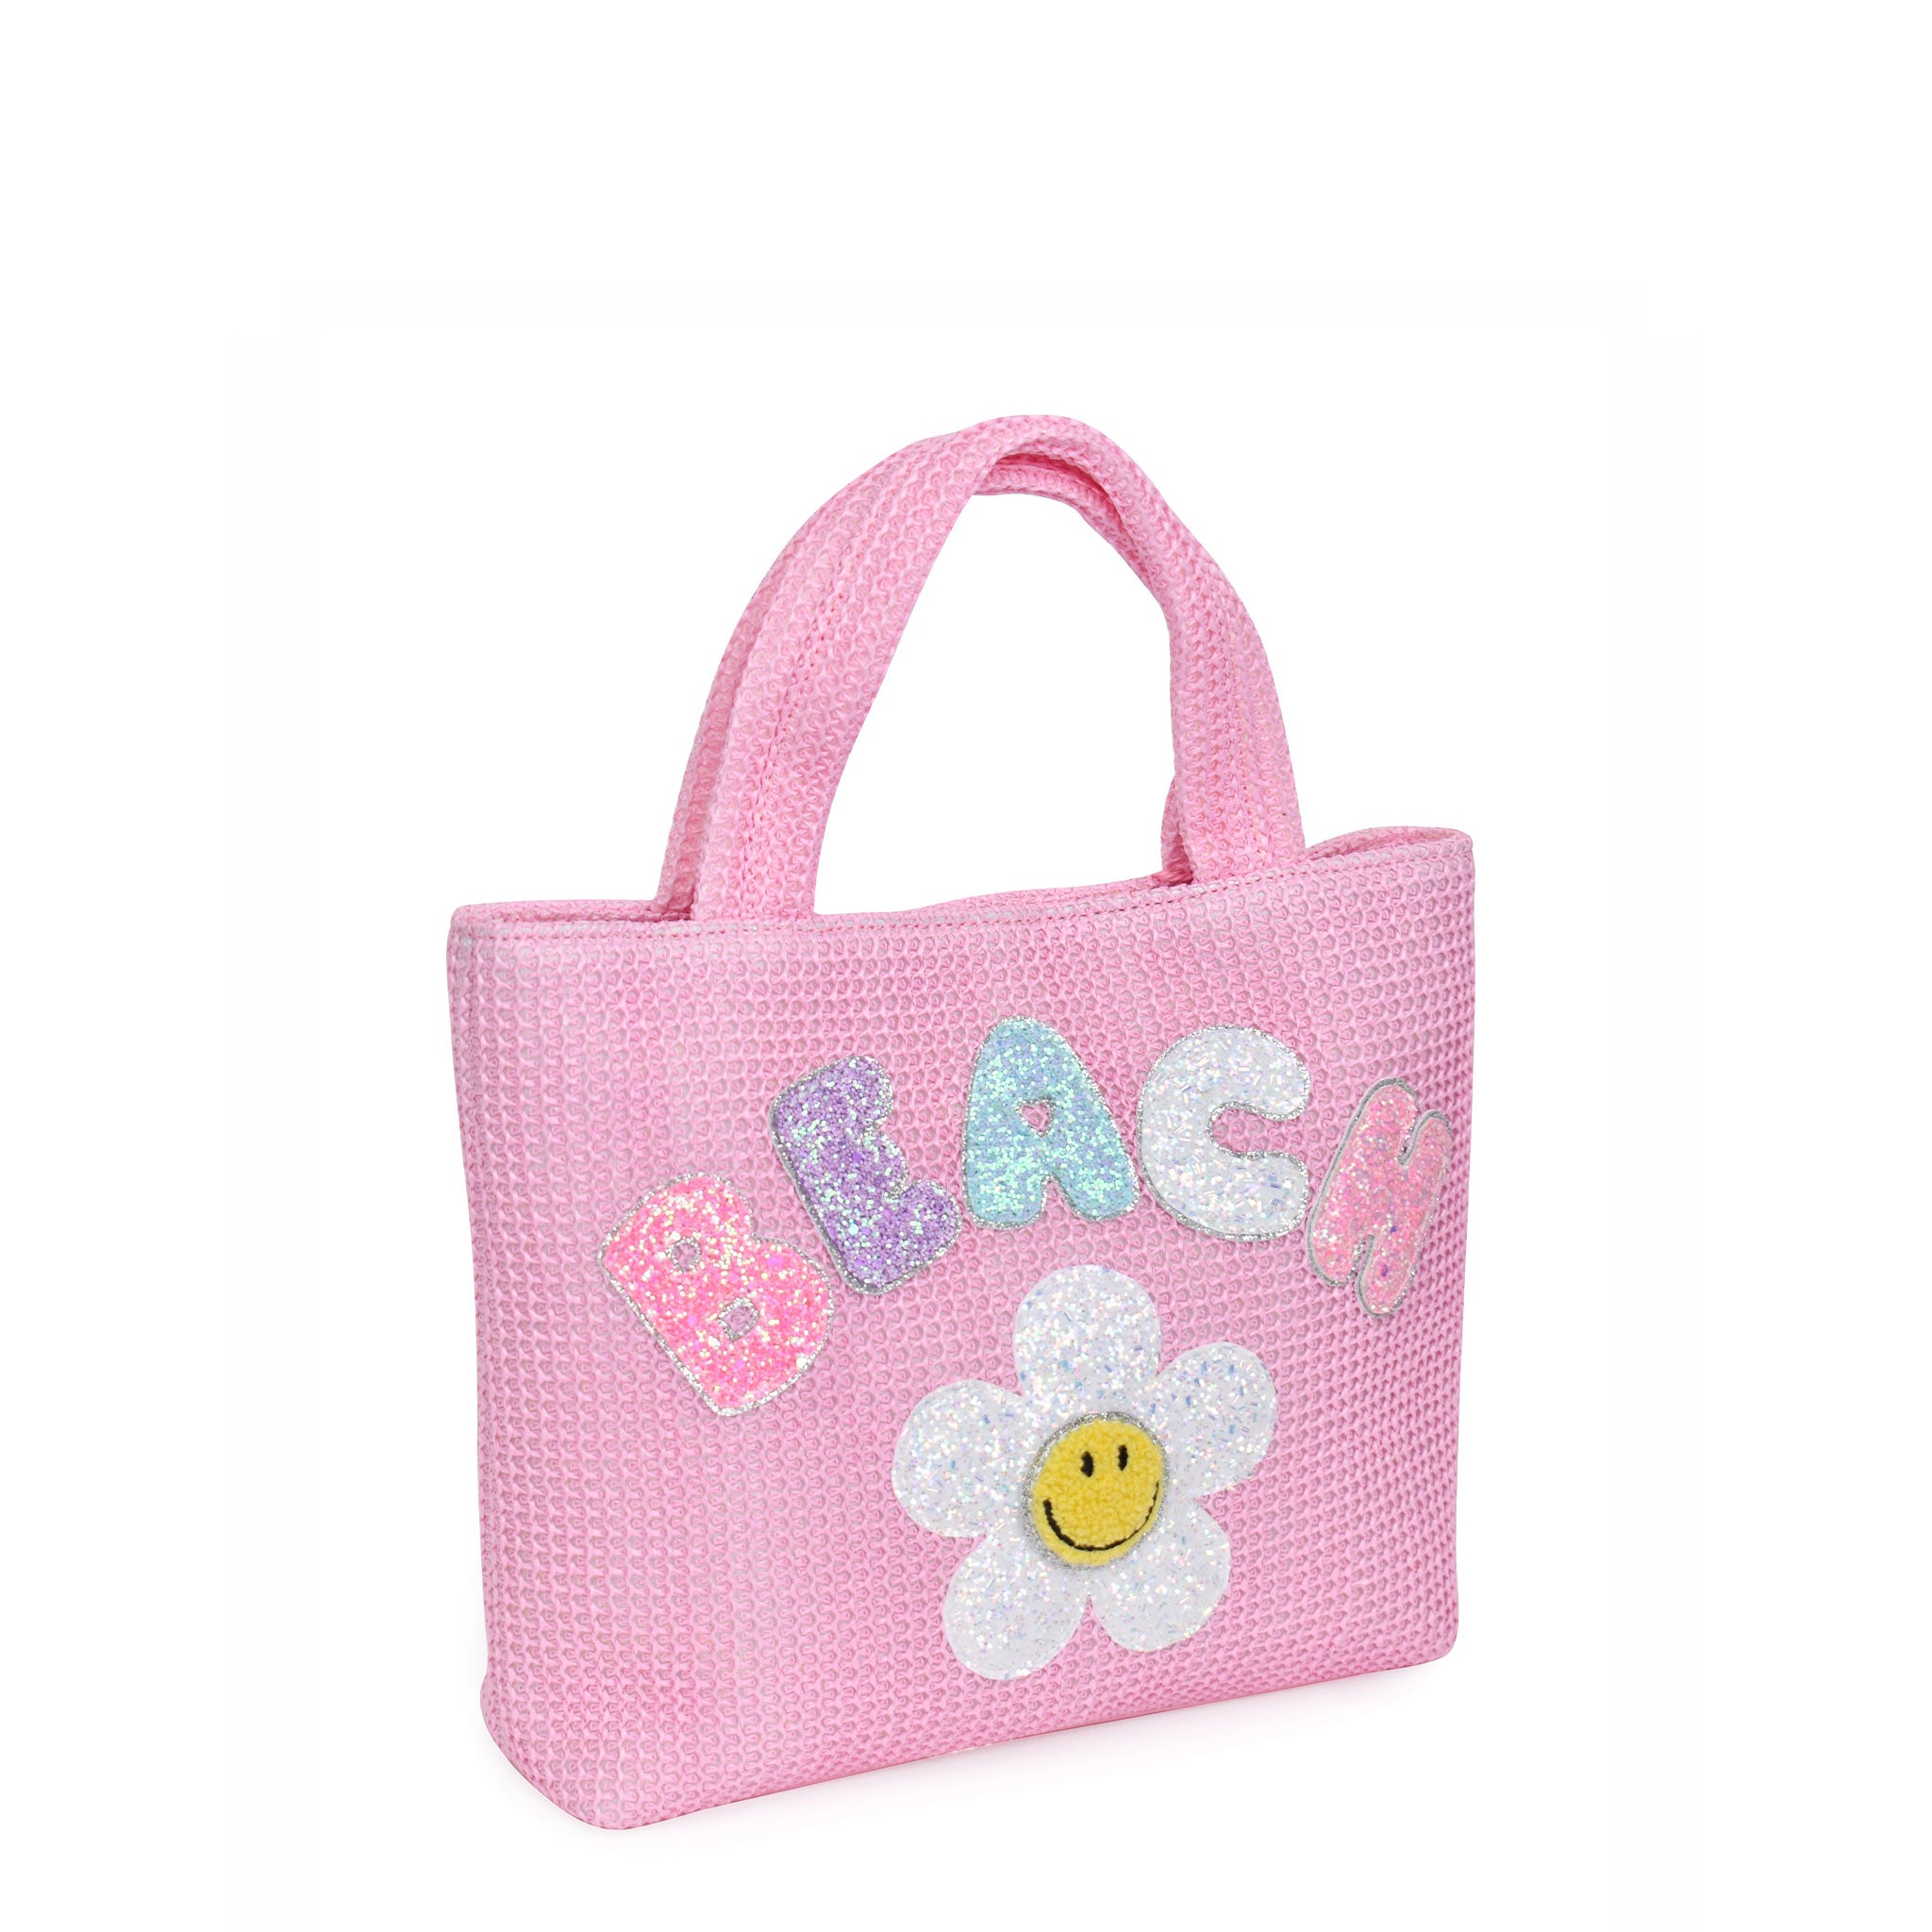 Side view of mini pink straw 'Beach' tote bag with smiley daisy patch